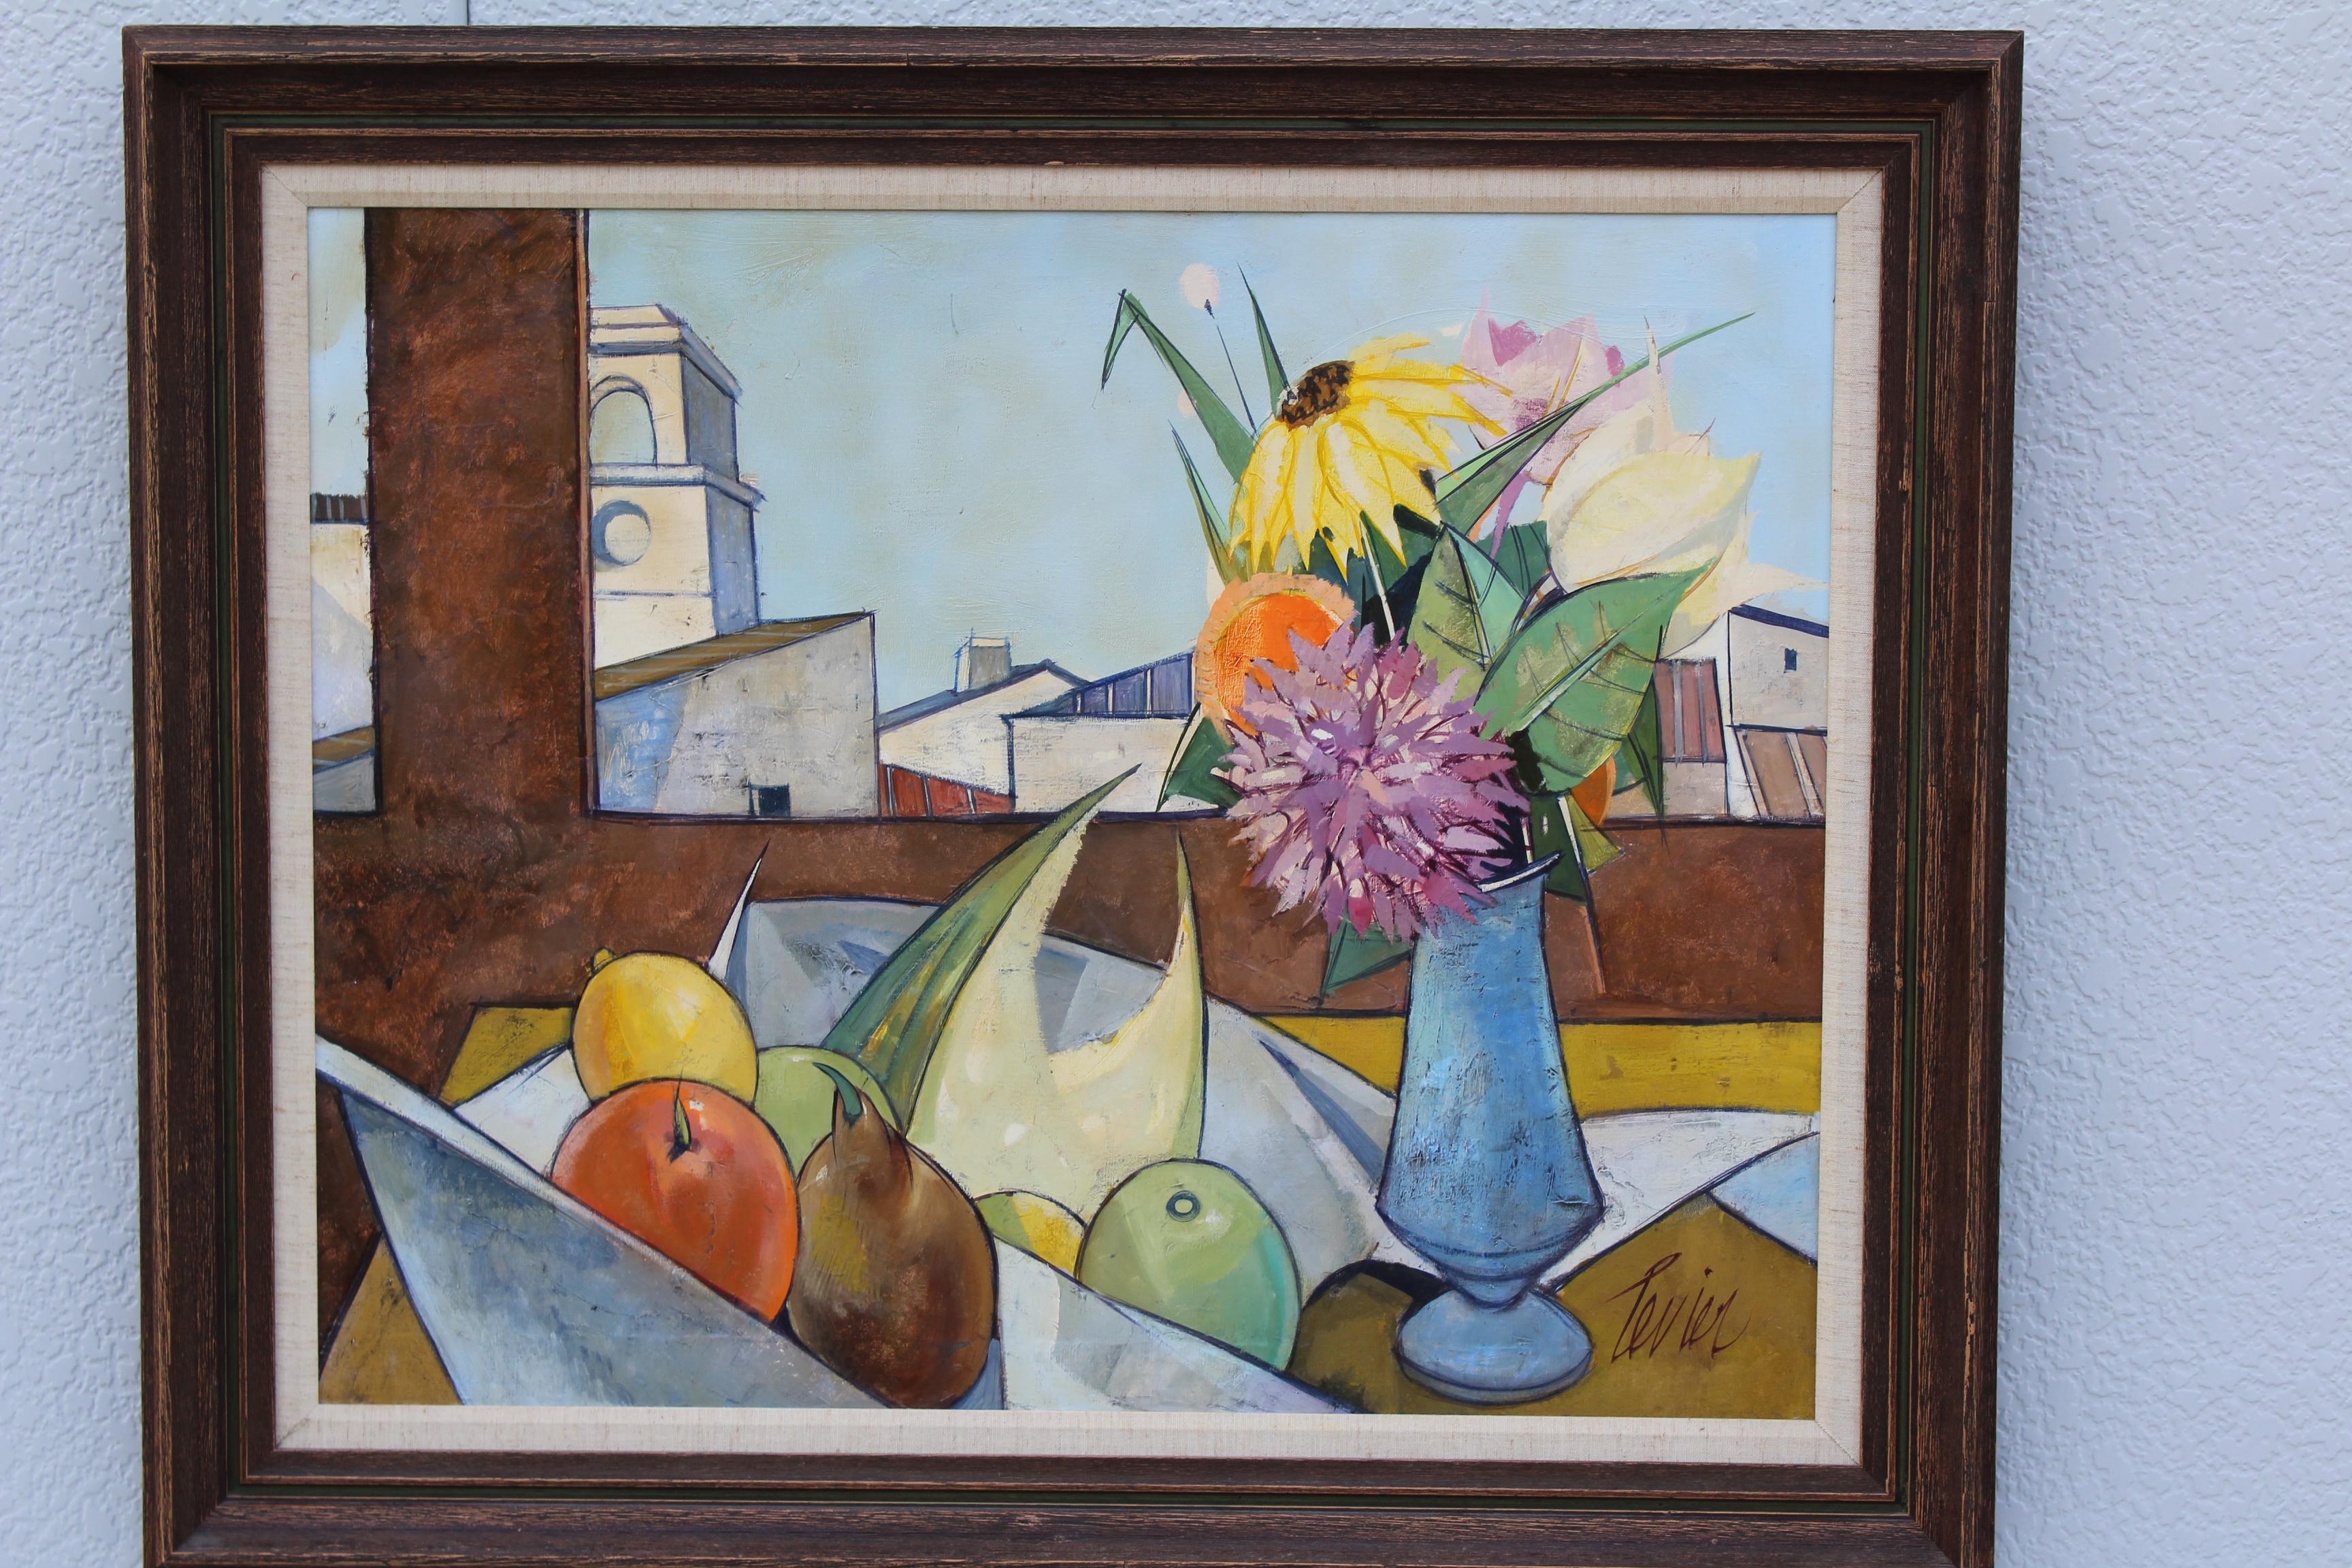 1960s oil on canvas artwork by French artist Charles Levier tittle Dans Le Atelier (1920-2003).

Artwork measurements width 30'', height 24''.

1 of 7 pieces from a private collection.